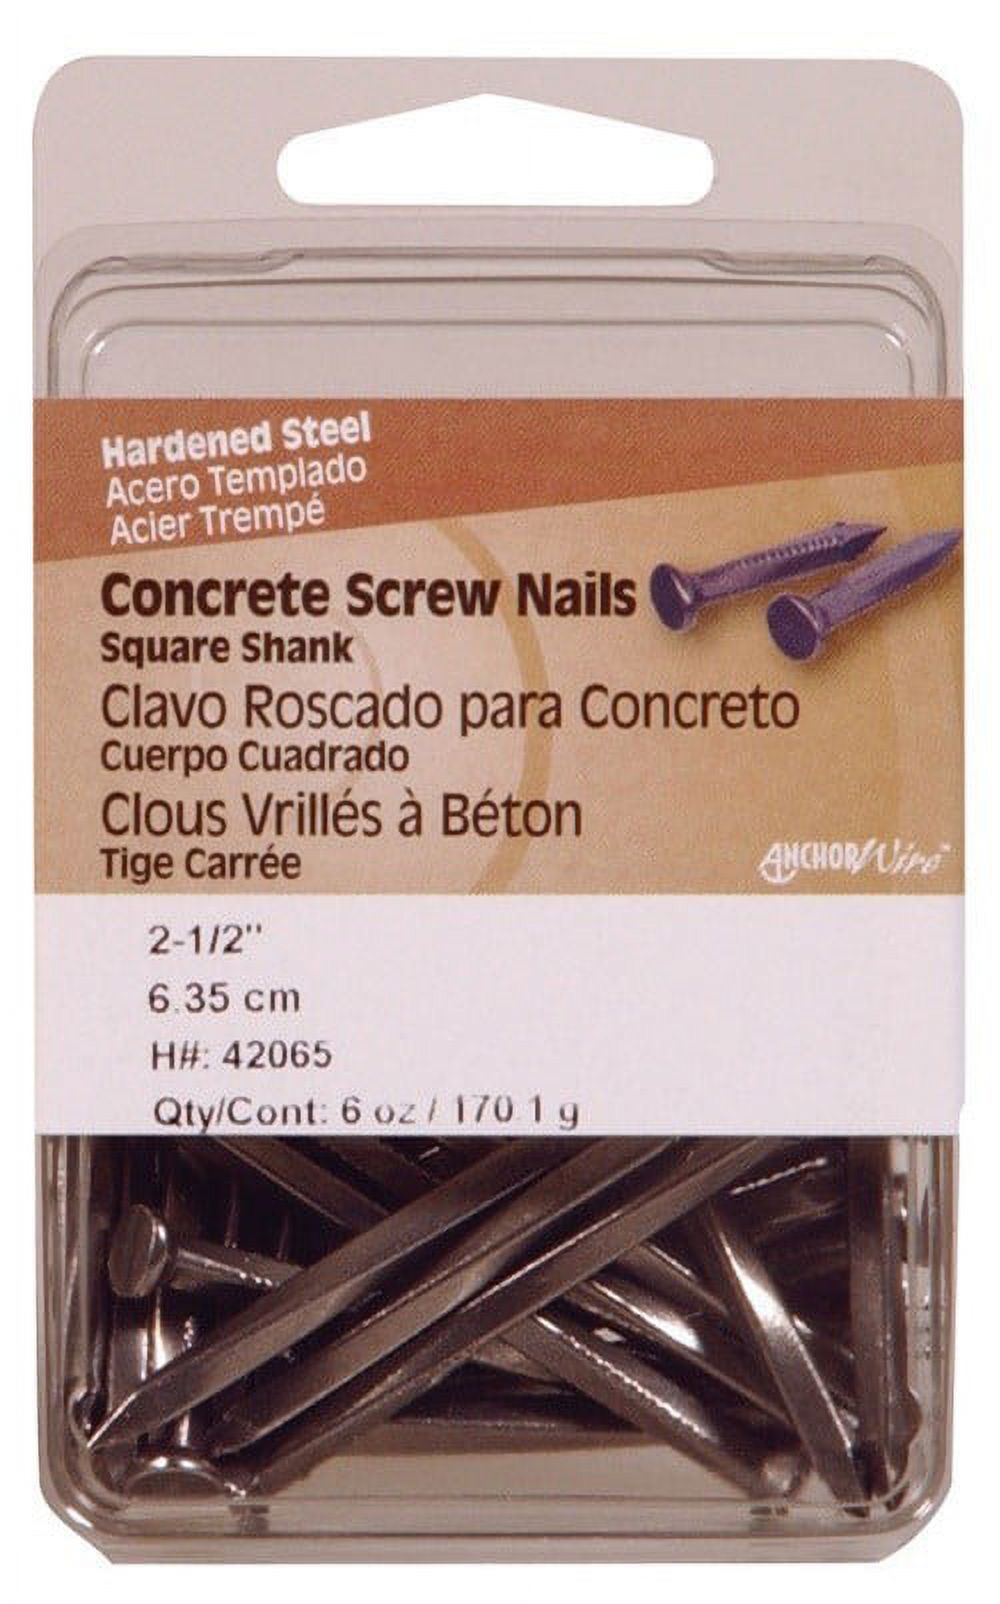 Hillman Concrete Screw Nails 2-1/2 " Square Steel Clamshell Pack of 5 - image 1 of 2